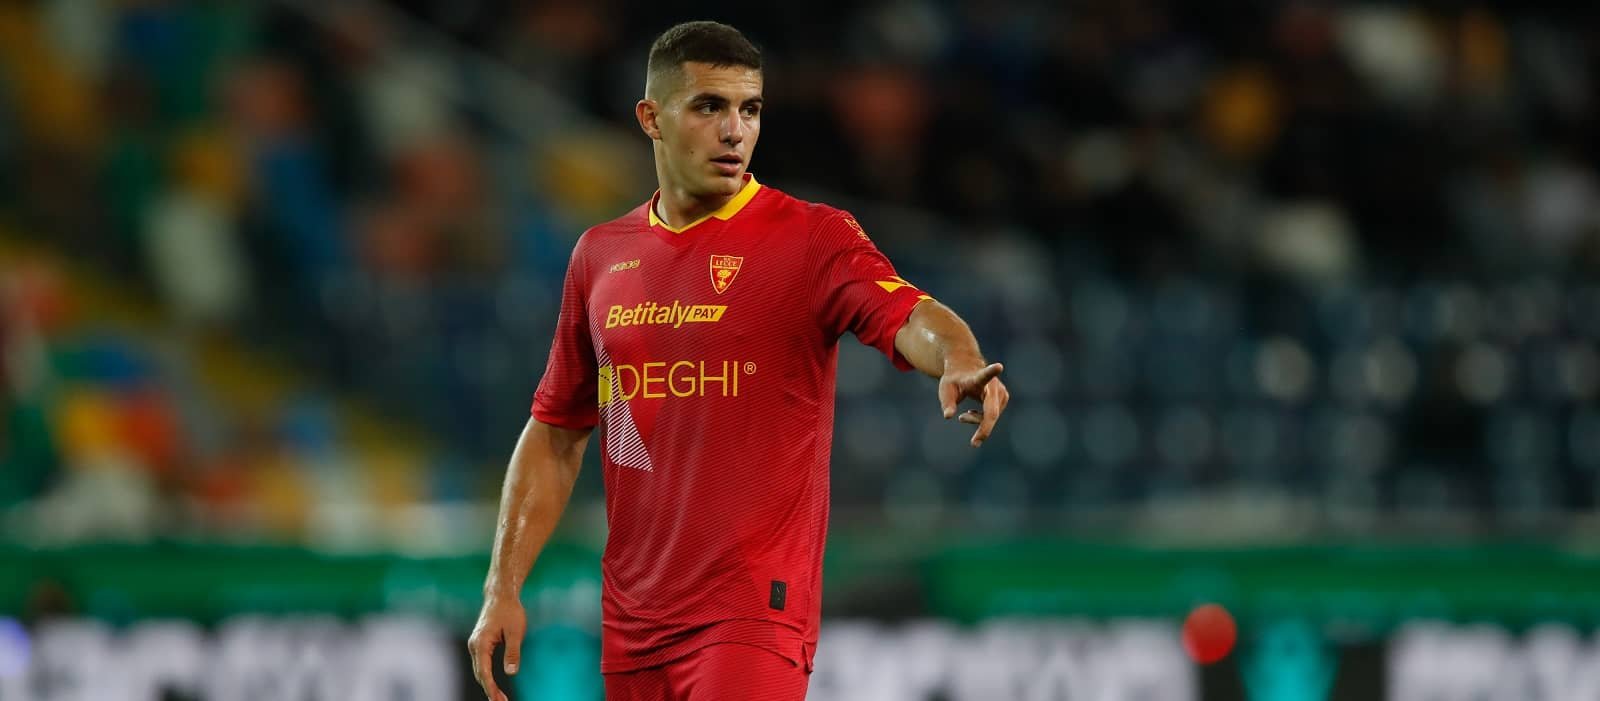 Nikola Krstovic emerges as unlikely January target for Manchester United – Man United News And Transfer News